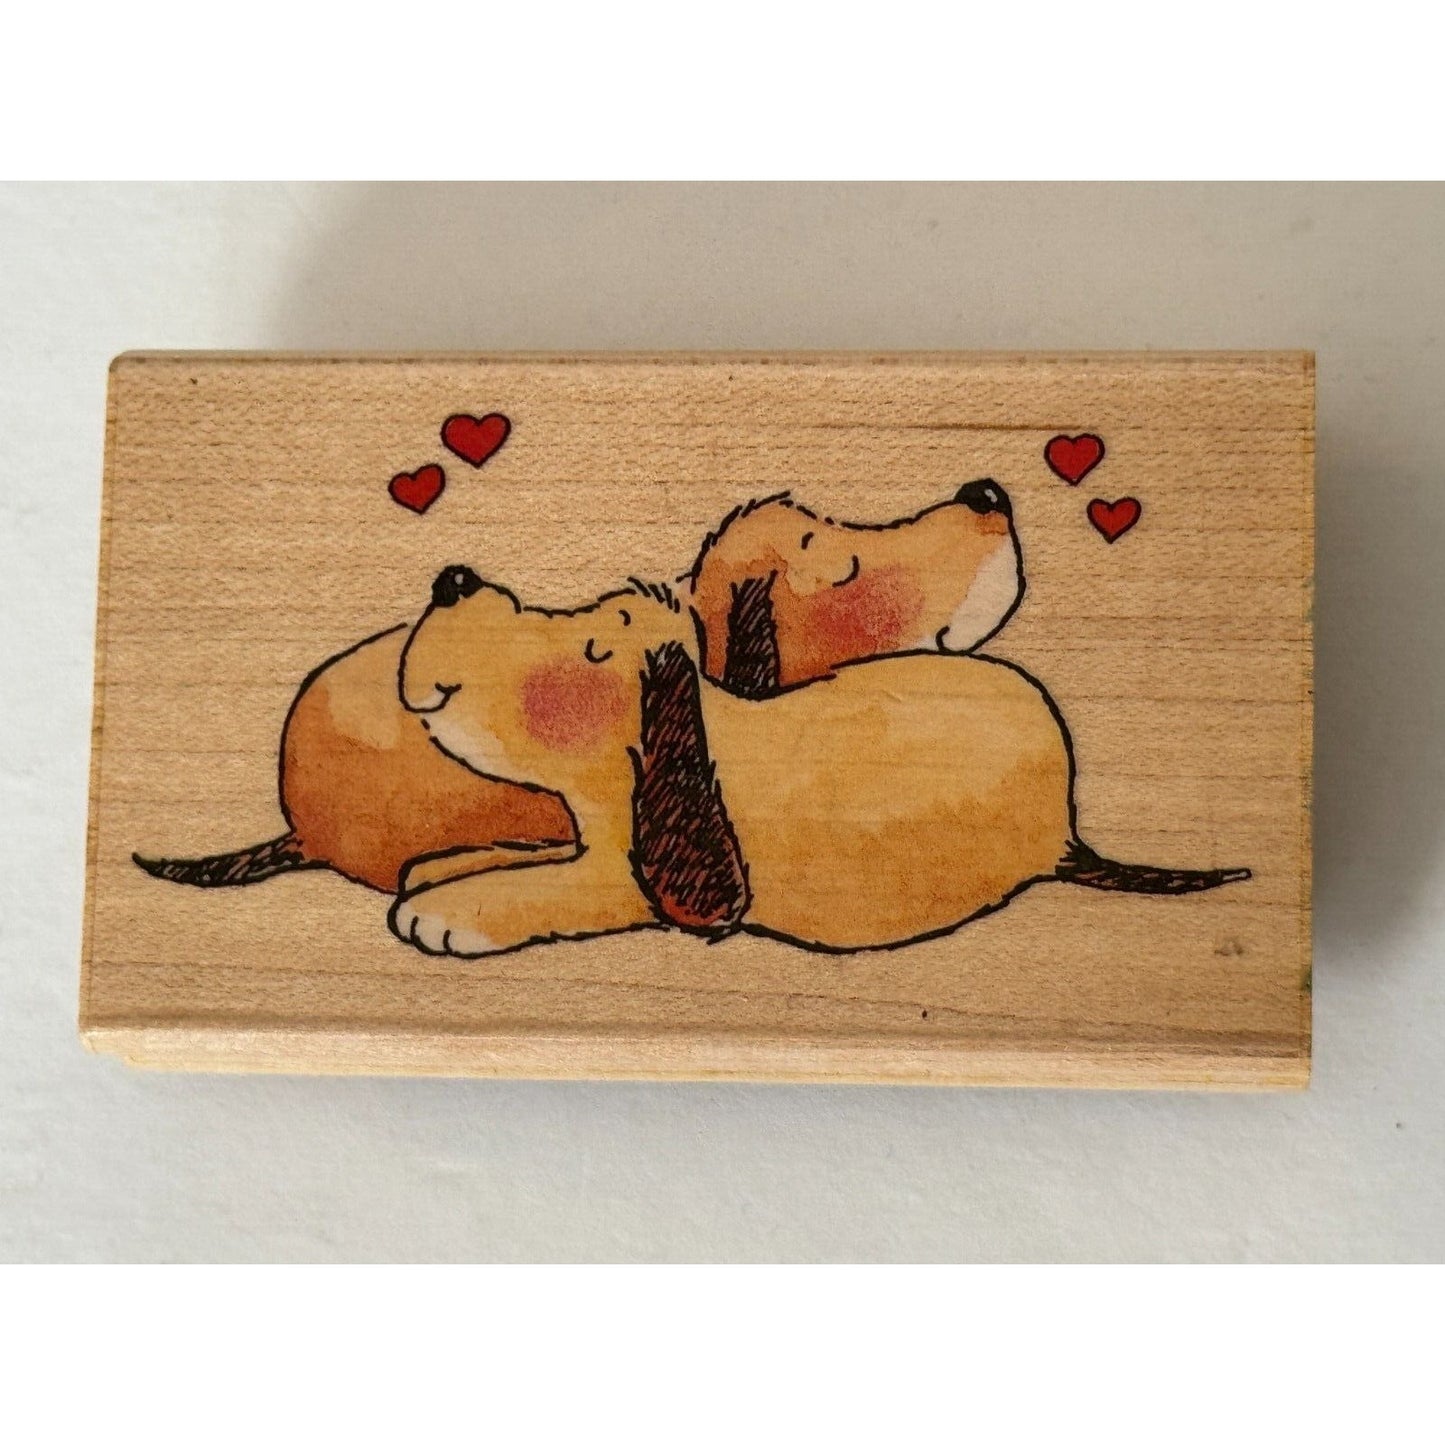 Penny Black Rubber Stamp Just Next to You Card Making Puppy Love Dog Animal